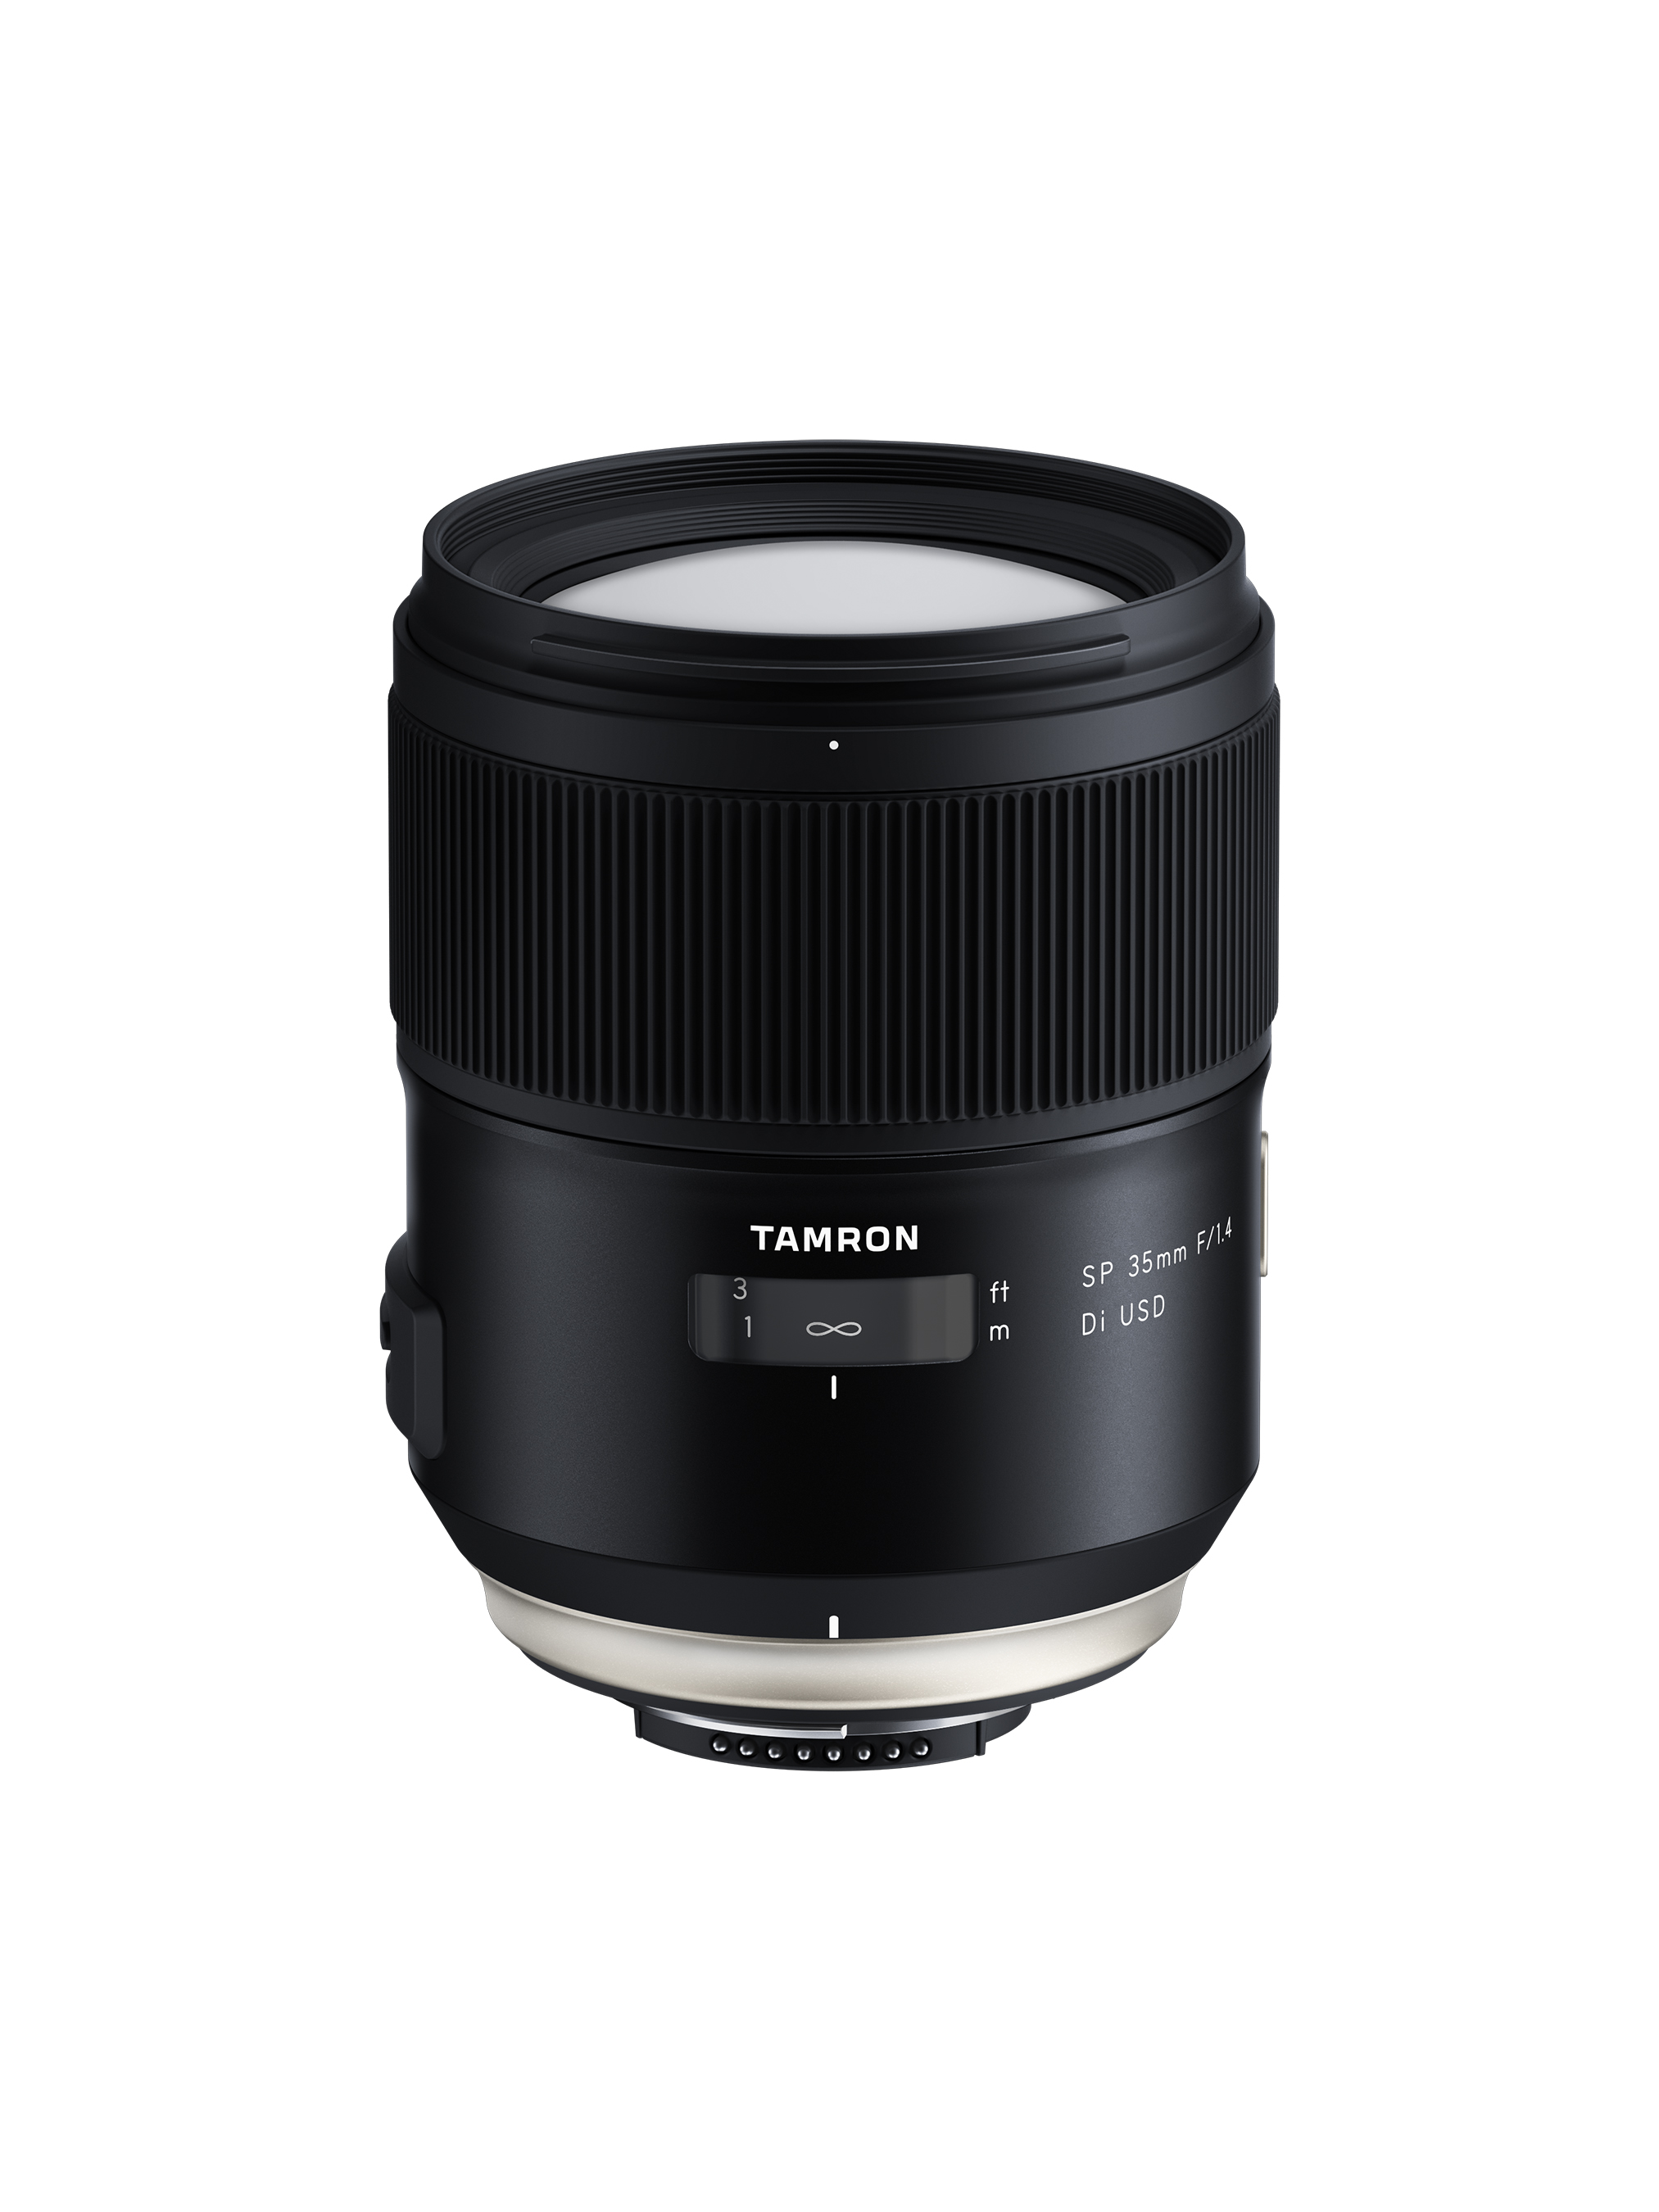 The Latest Tamron Lenses Include a New Zoom for Sony E Mount